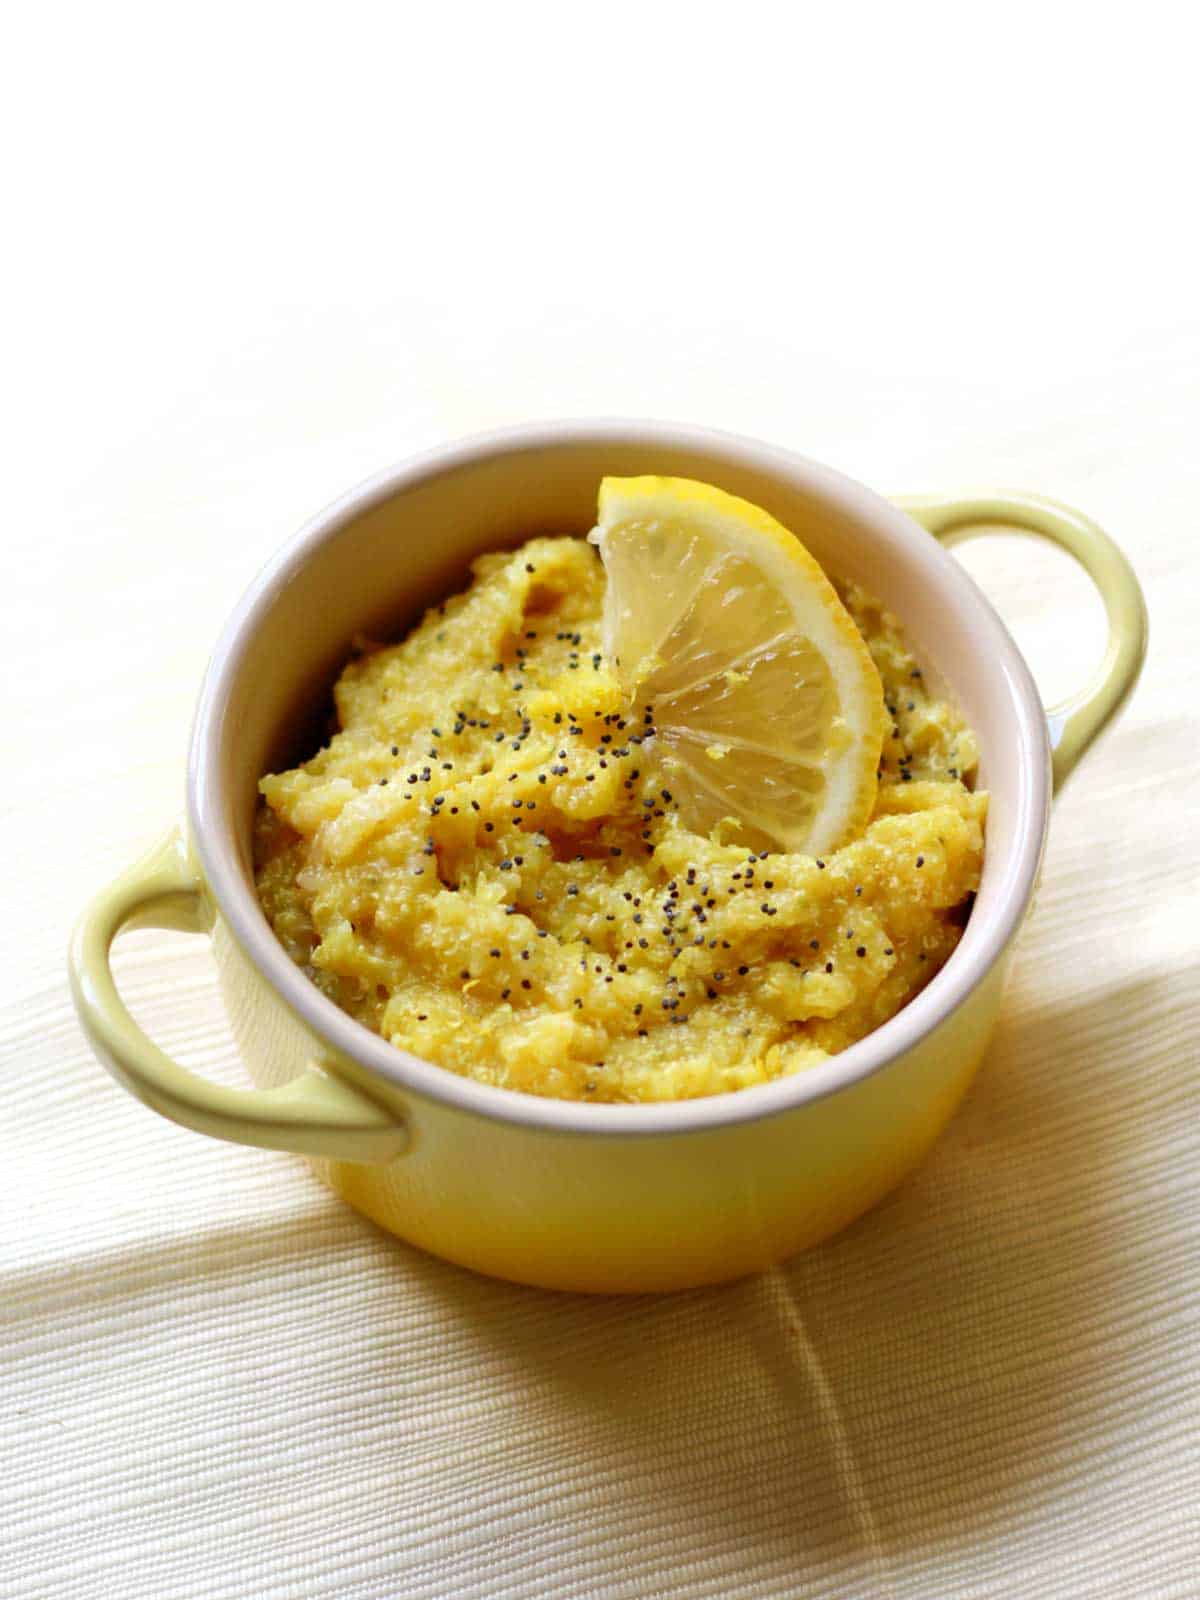 Yellow mug with two handles filled with quinoa flakes garnished with lemon slices.